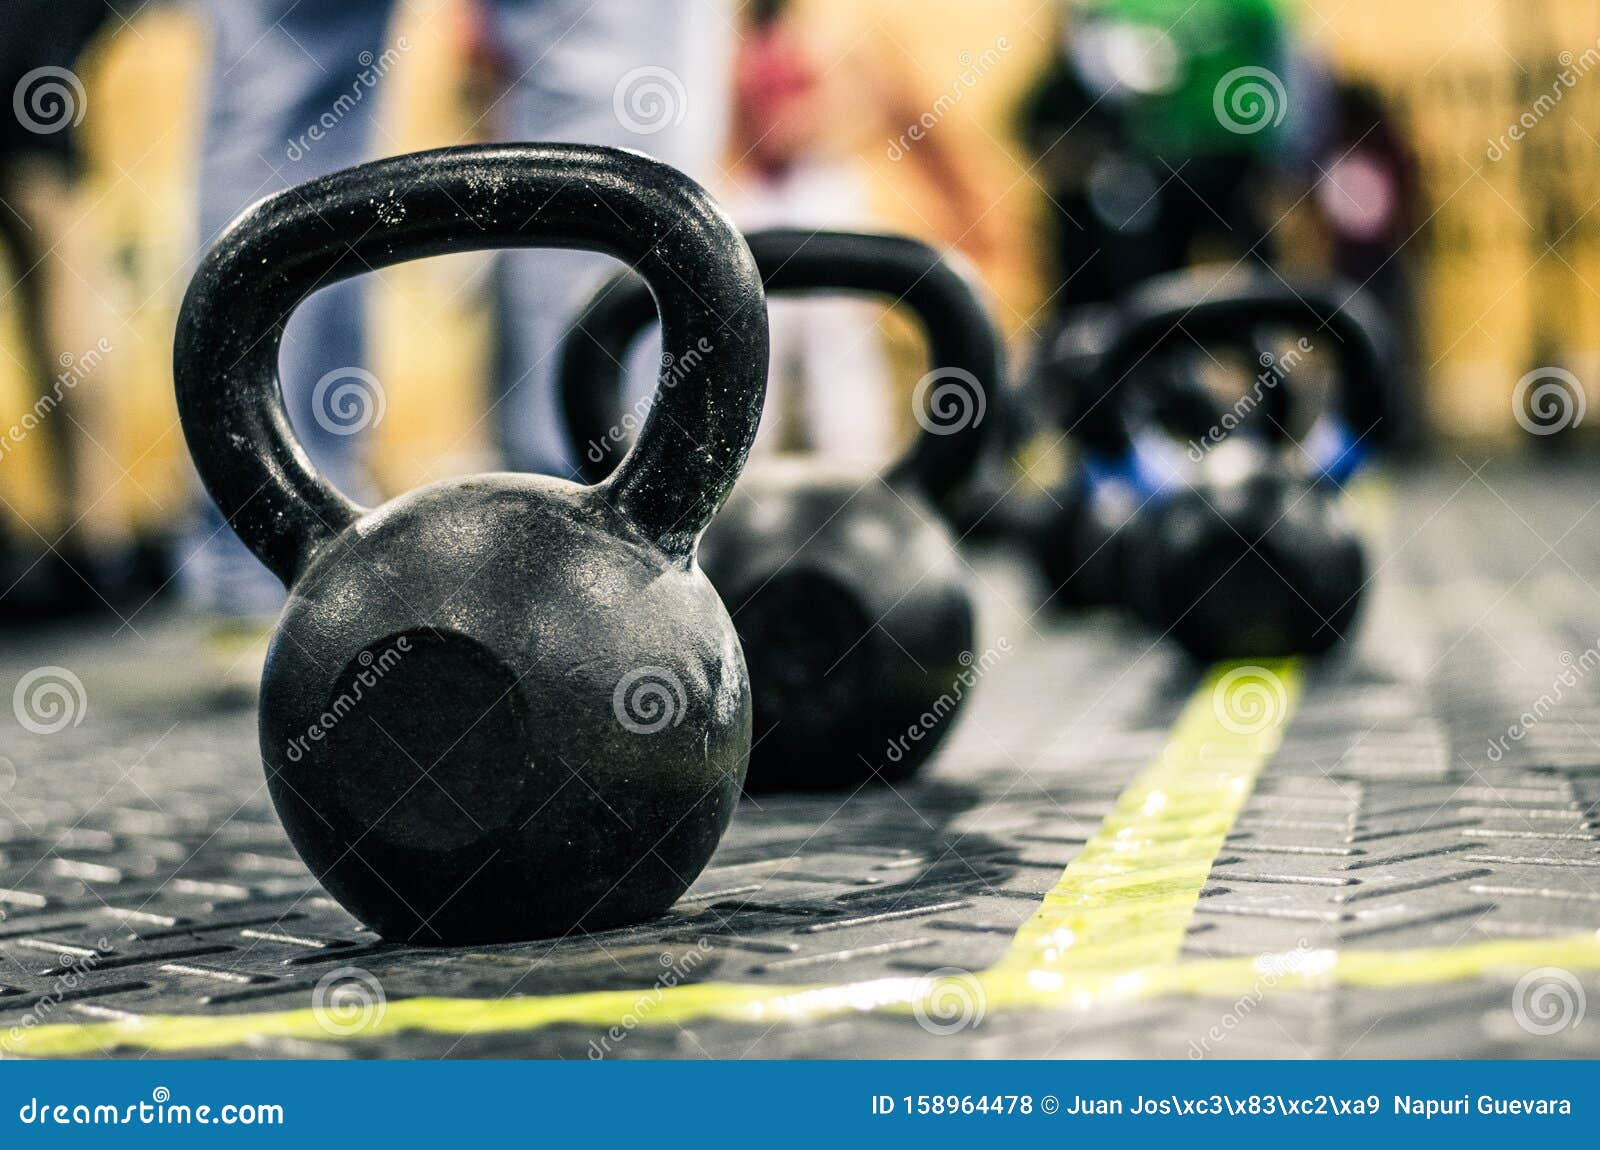 different sizes of kettlebells weights lying on gym floor.